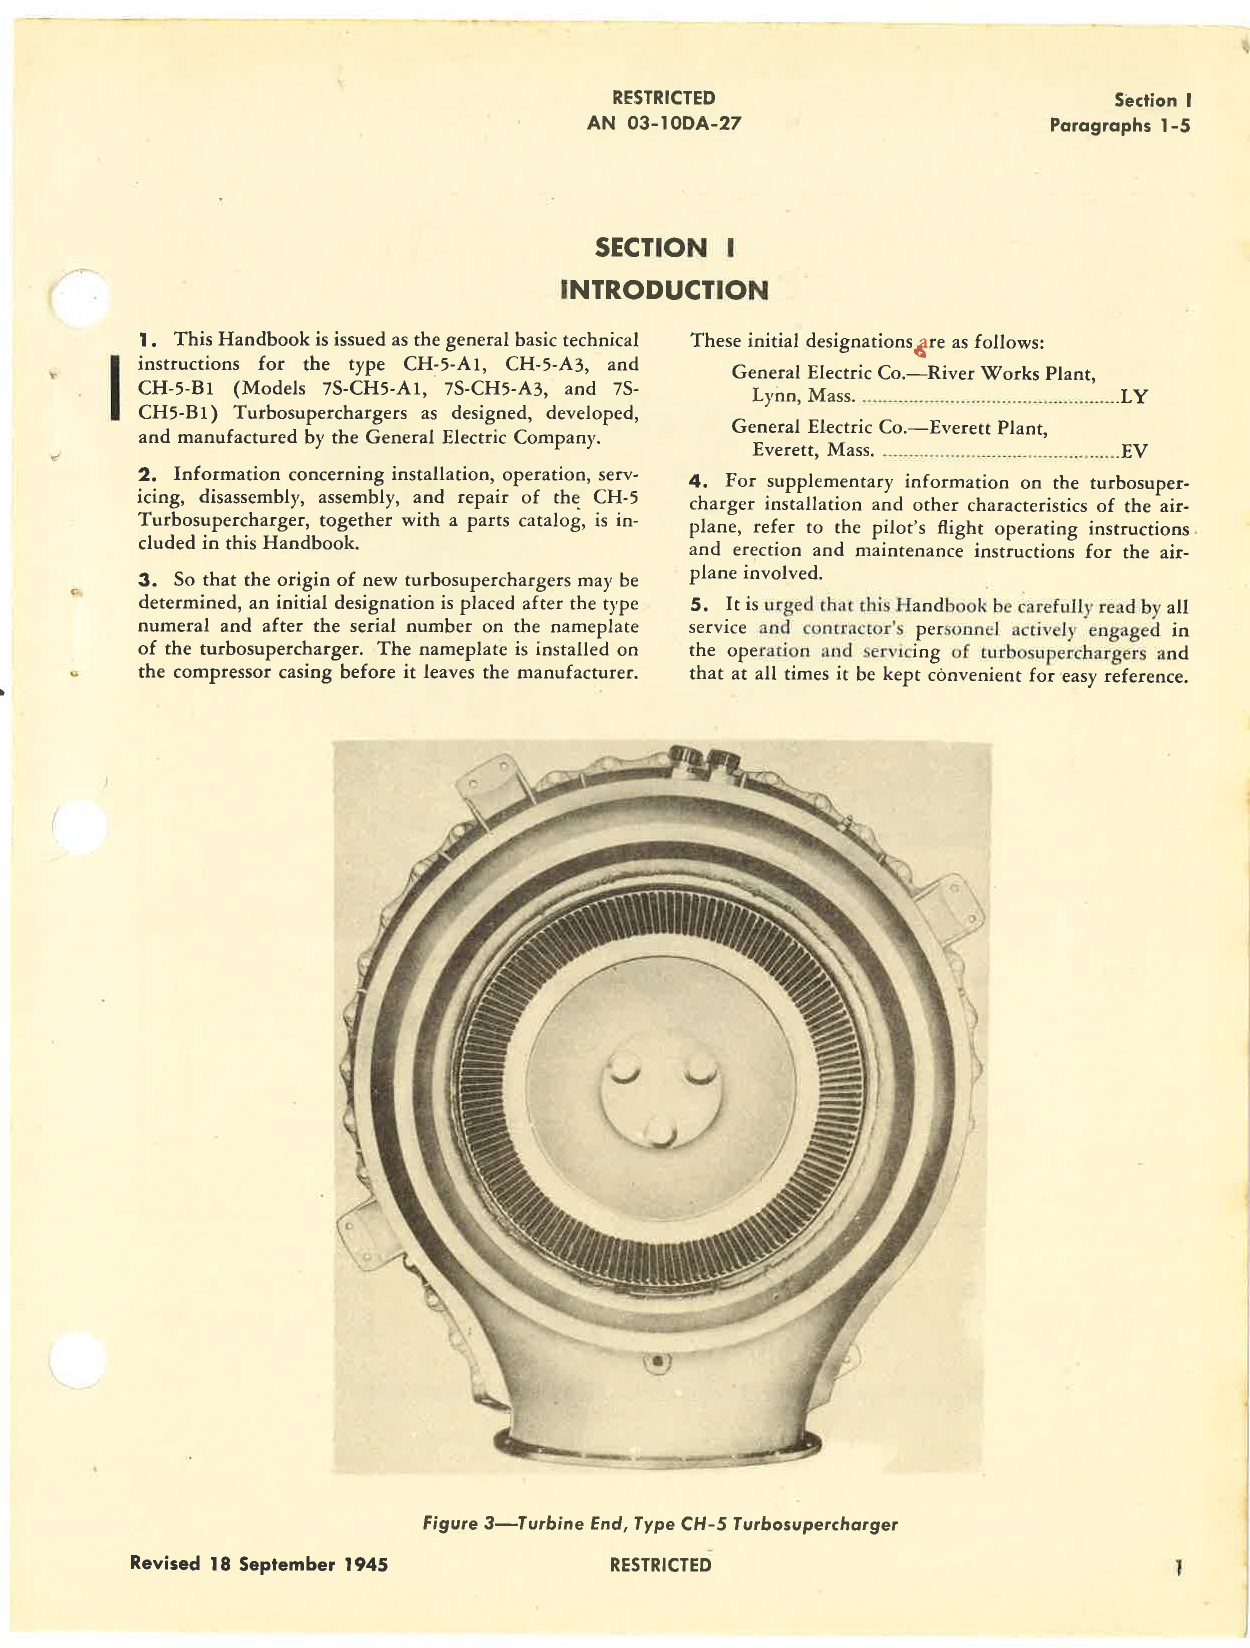 Sample page 5 from AirCorps Library document: Operation, Service, & Overhaul Instructions with Parts Catalog for Turbosuperchargers Types CH-5-A1, CH5-A3, and CH-5-B1